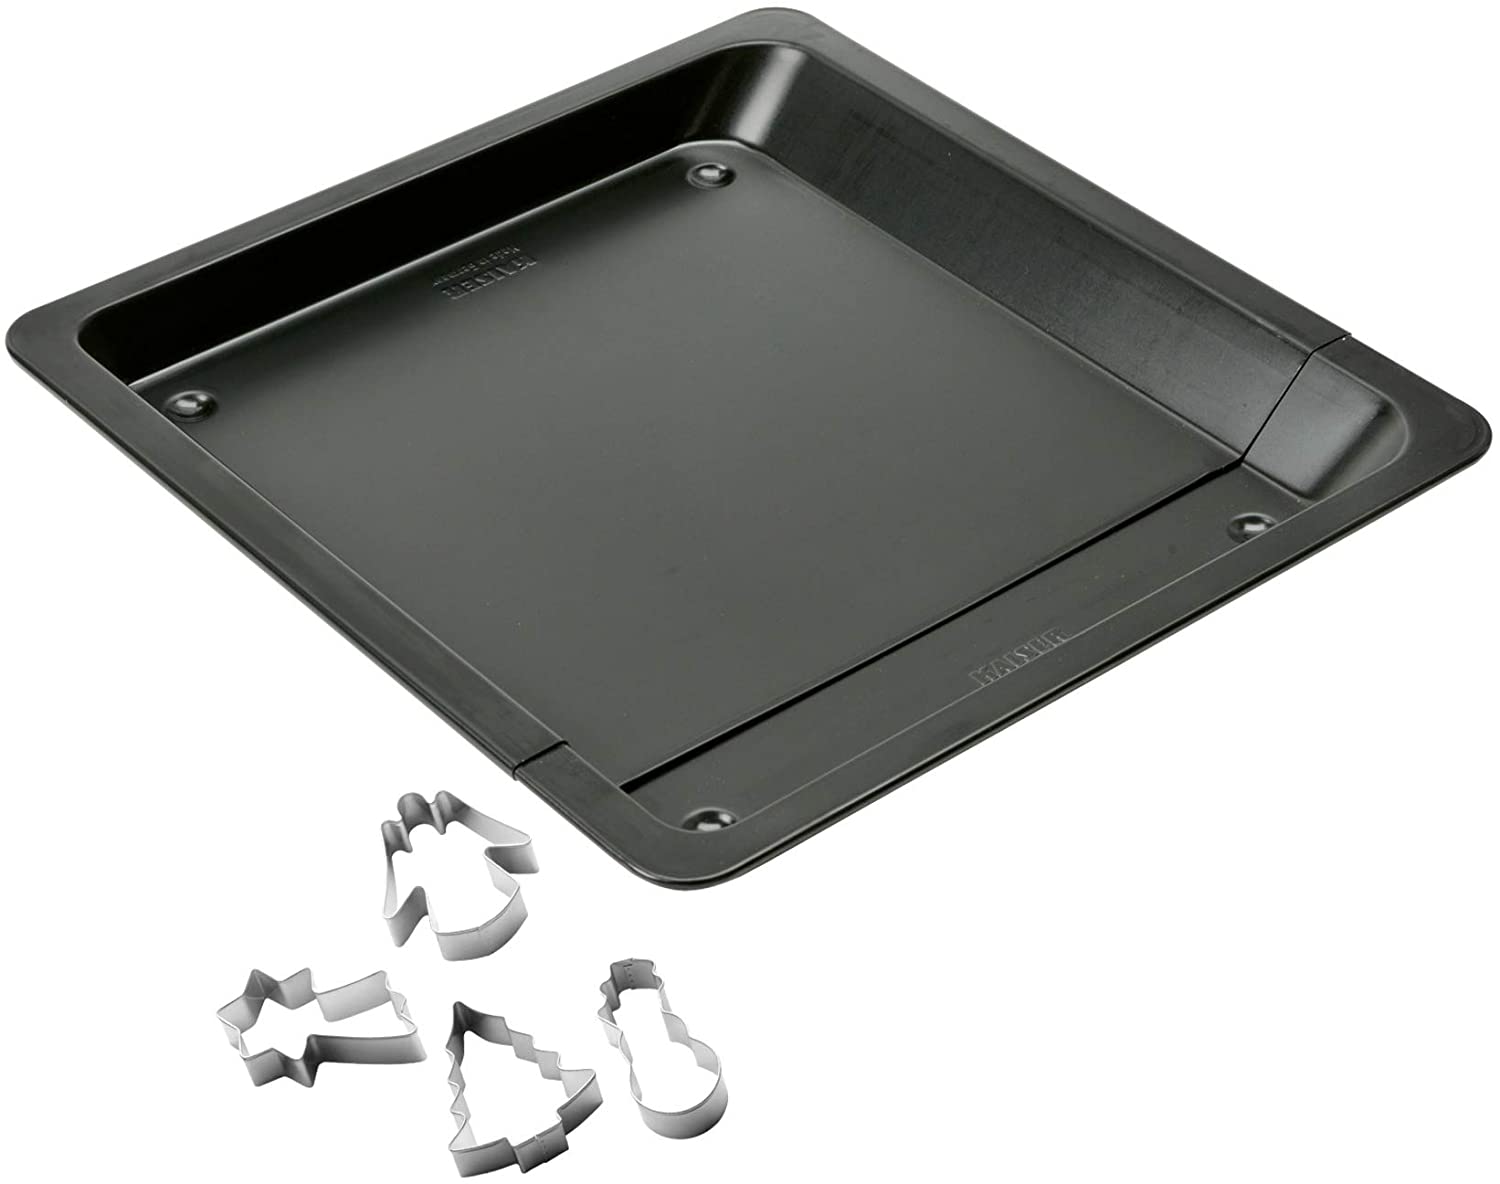 Kaiser 2300614069 Variable Oven Baking Tray with 4 Cutters, Steel Black, 35.3 x 33.5 x 5 Units